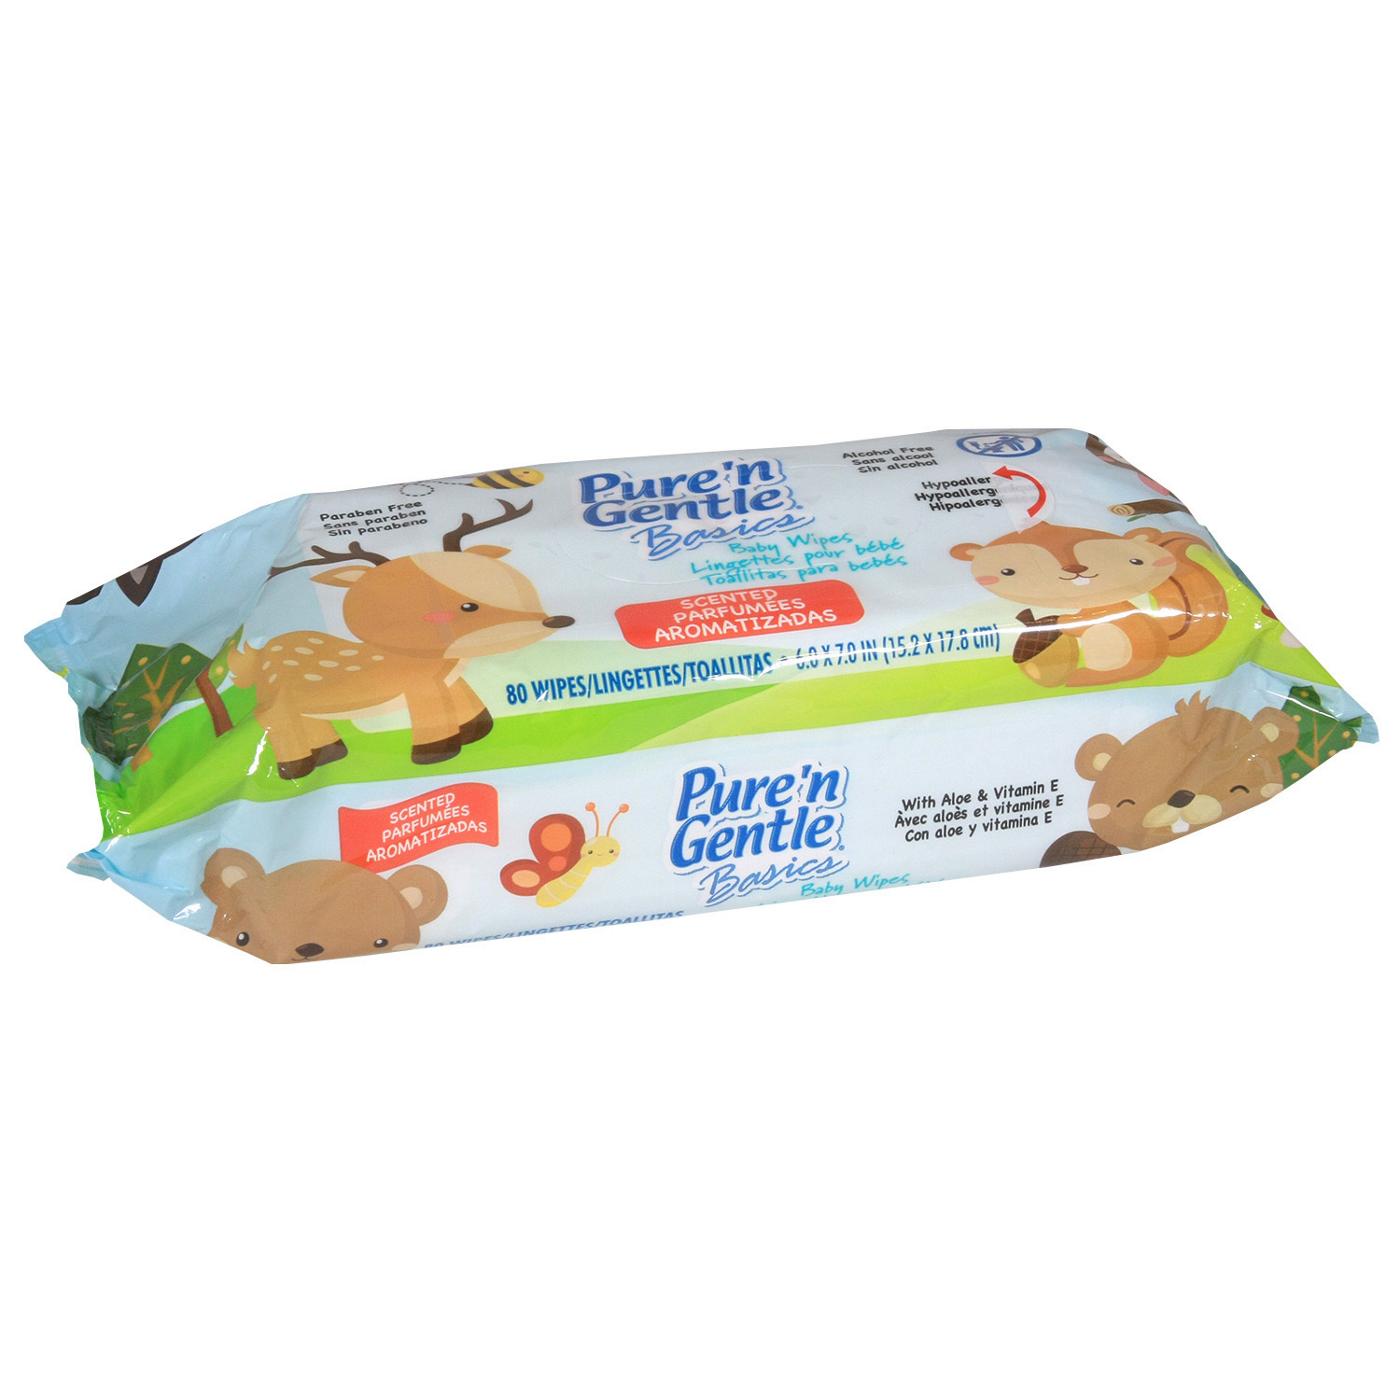 Pure'n Gentle Basics Baby Wipes - Scented; image 2 of 3